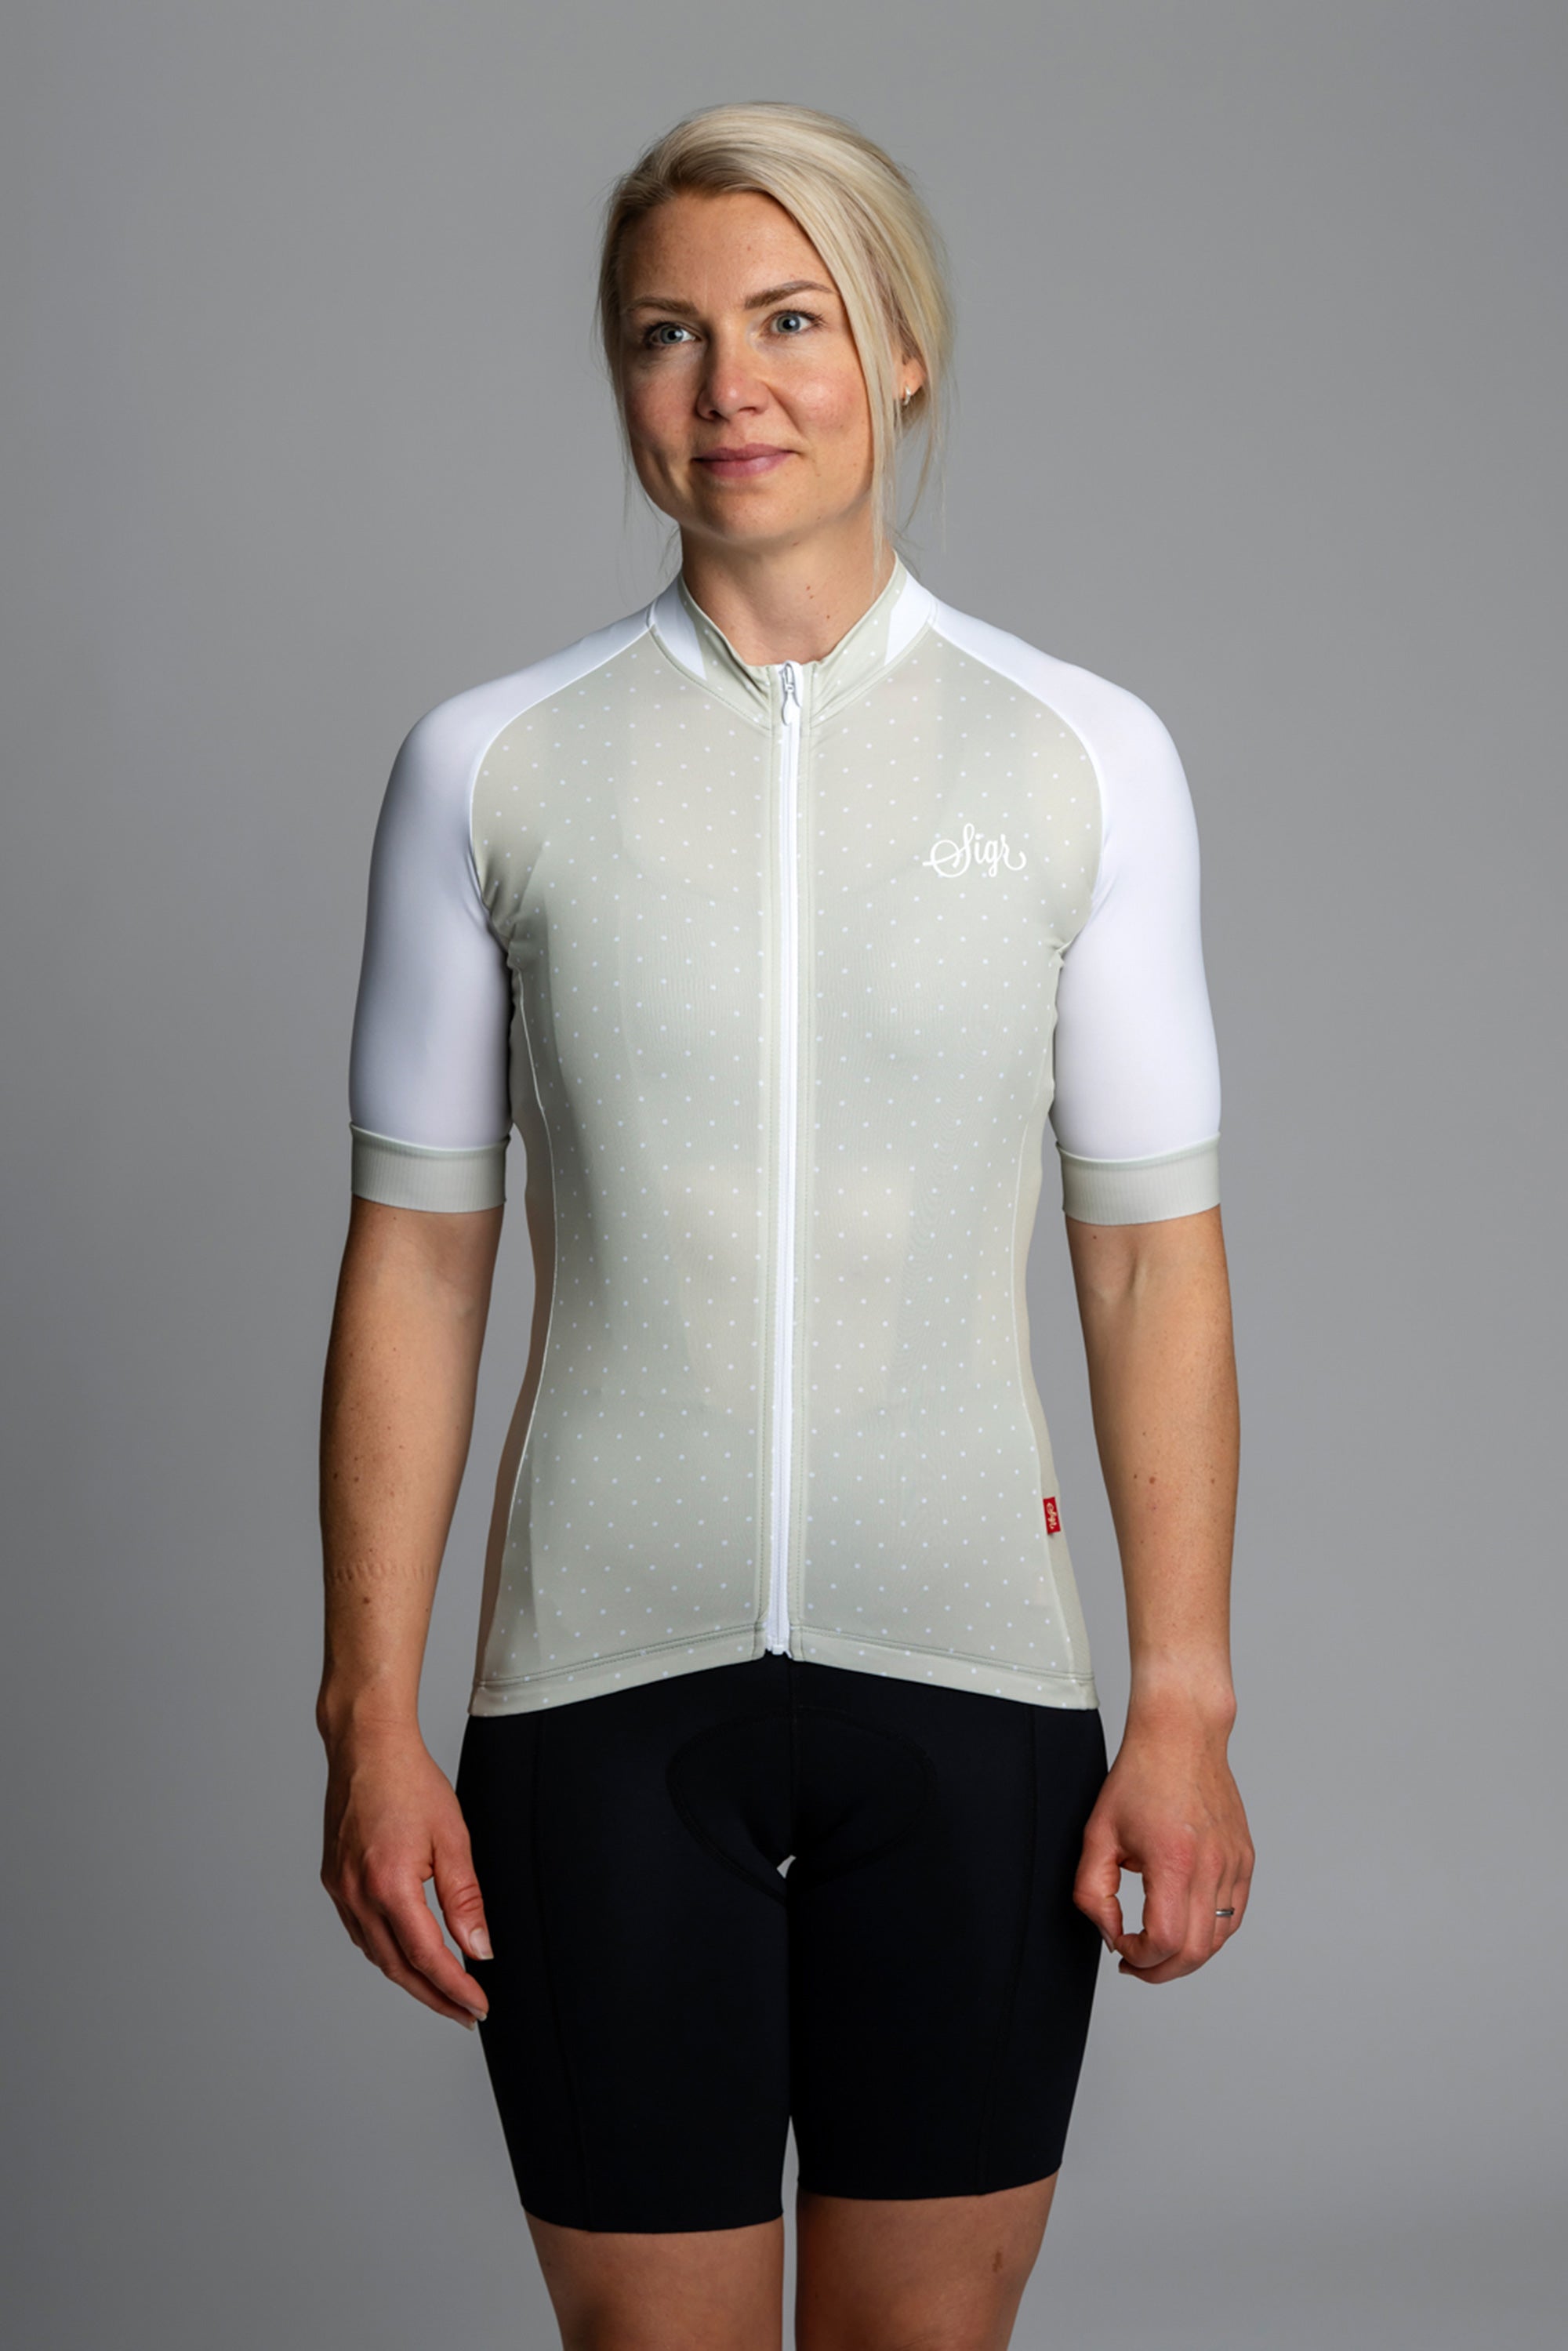 Pear Legacy - Road Cycling Jersey for Women